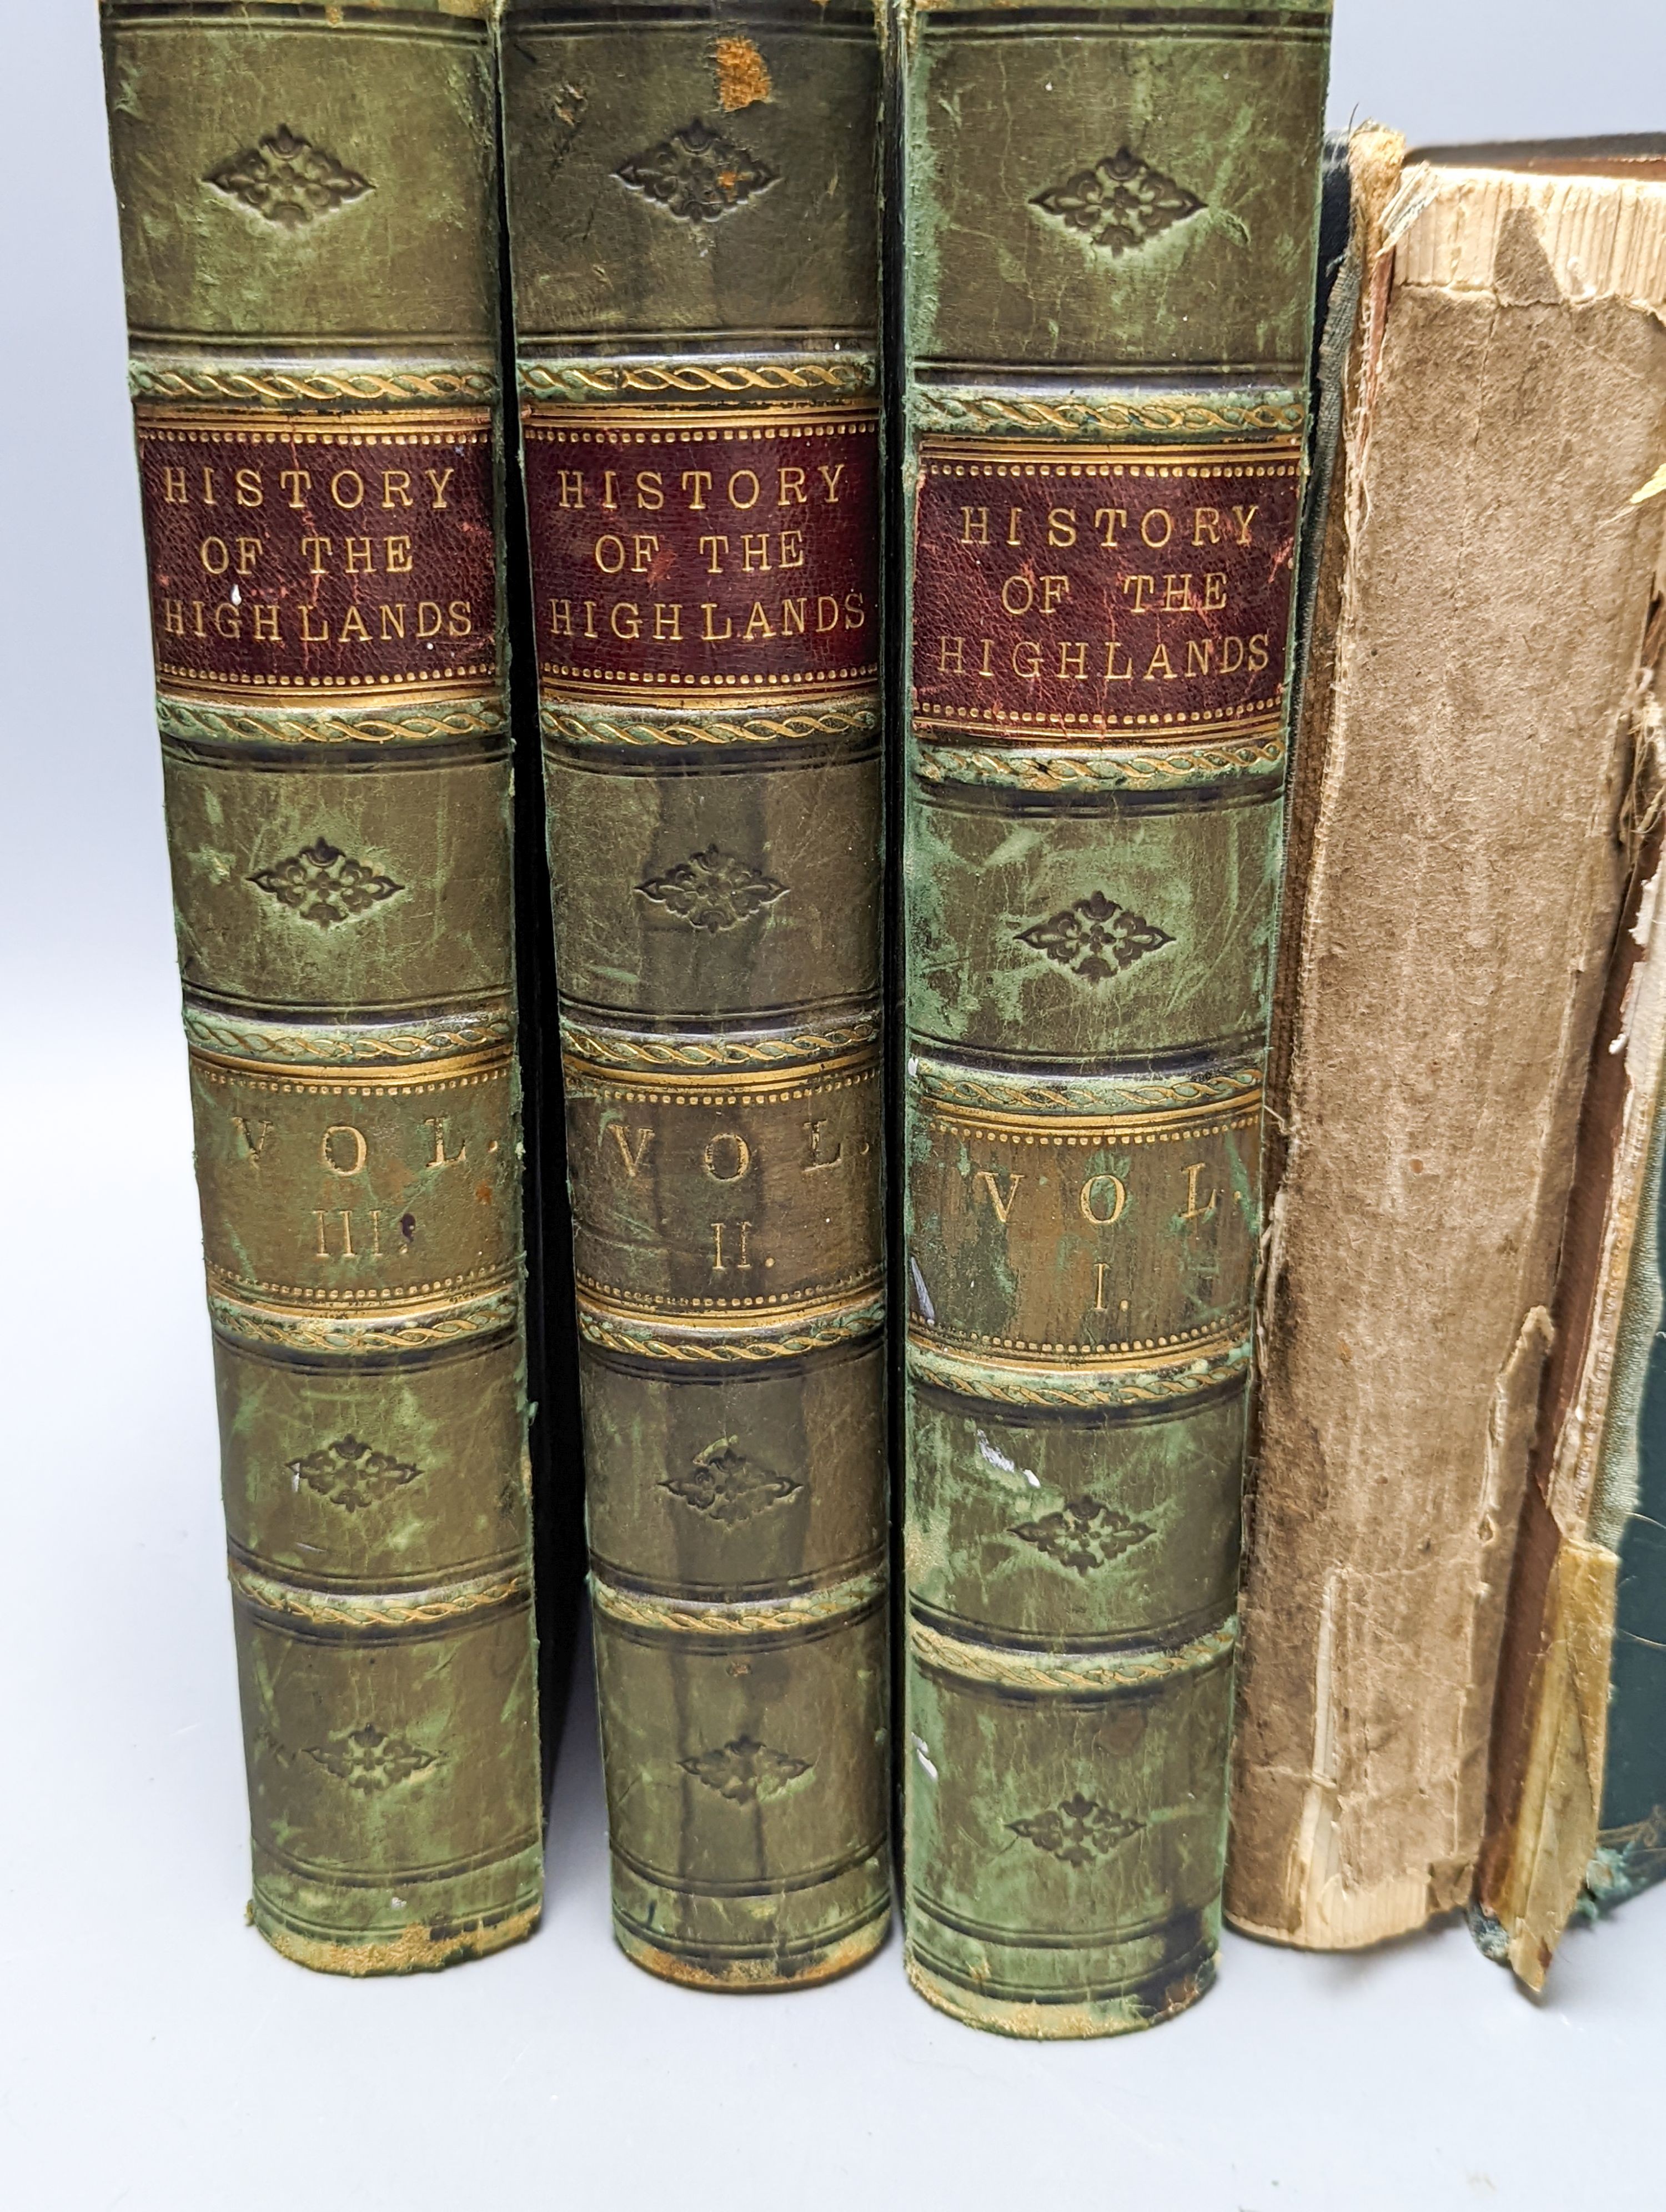 Browne, James - The History of the Highlands and of the Highland Clans, 3 vols (of 4), 4to, half calf, A. Fullerton & Co., Edinburgh, [1858-60]; [Queen Victoria] - More leaves from the Journal of Life in the Highlands, 8